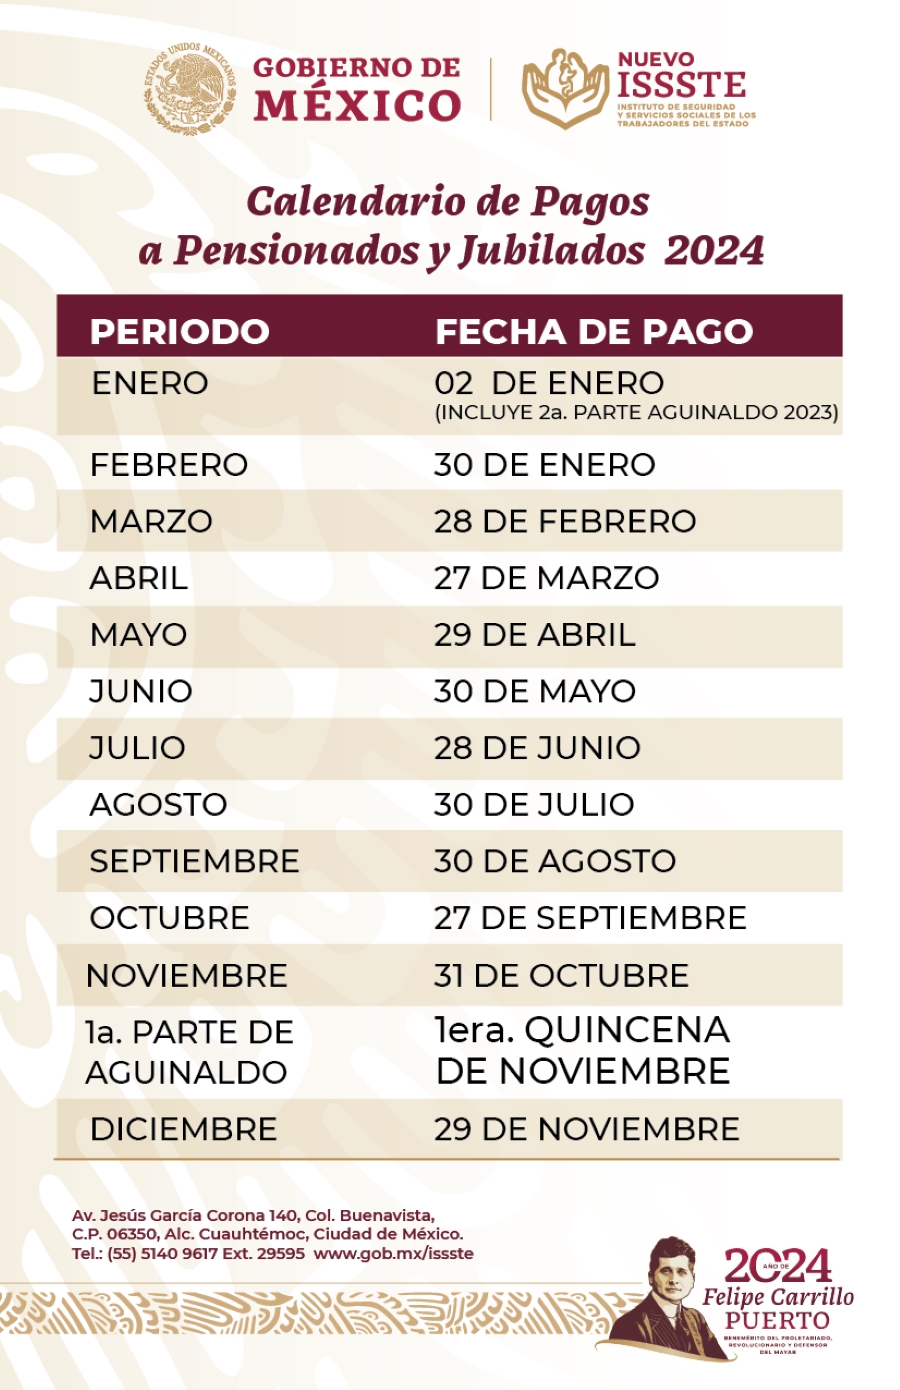 pago-pension-issste-abril-2024-deposito